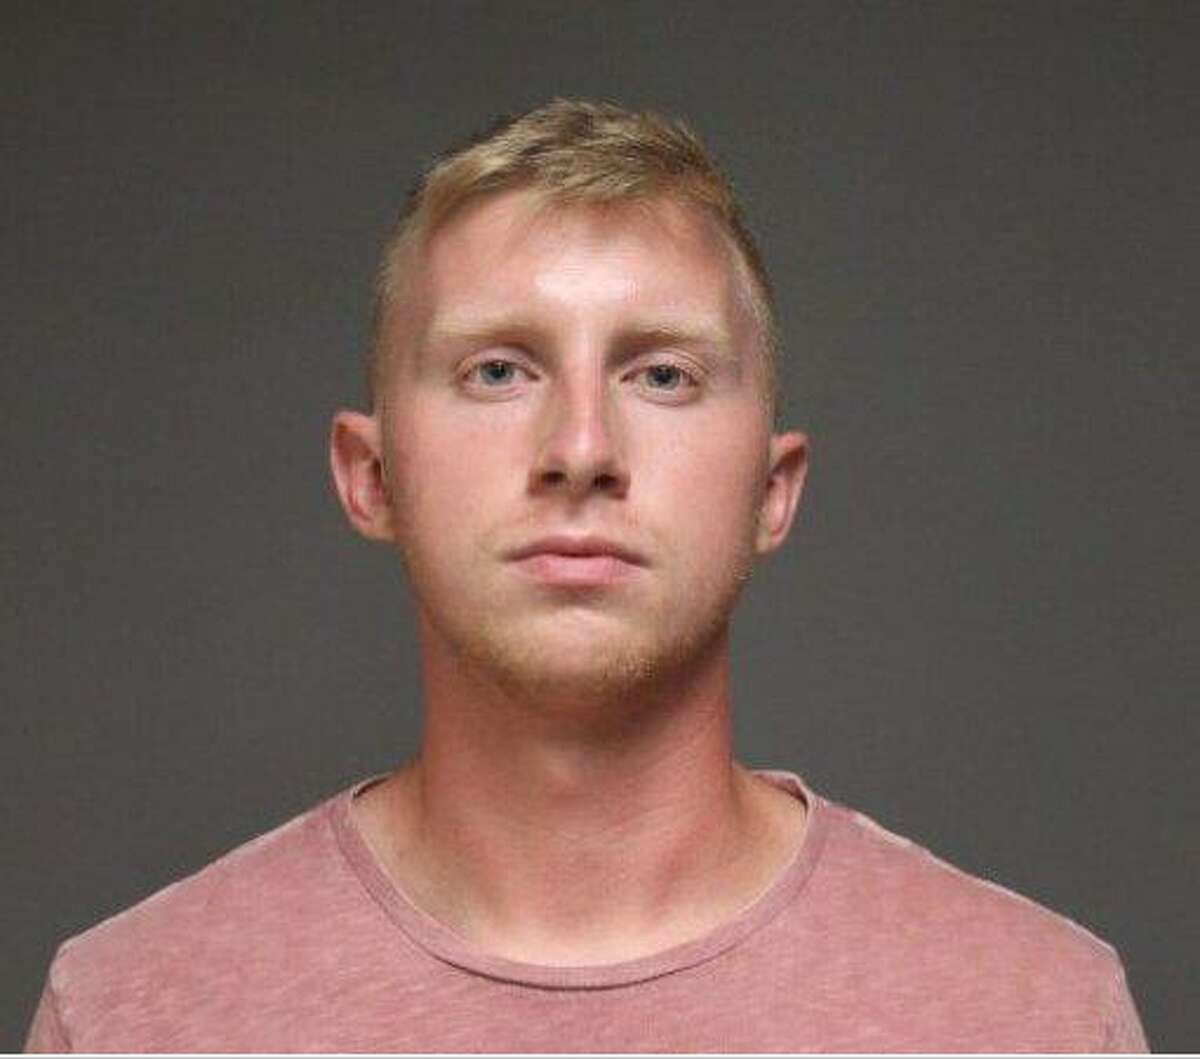 Declan P. Kot, a 22-year-old Easton resident, was arrested and charged for his alleged involvement in a fatal hit-and-run crash on Saturday, July 4.